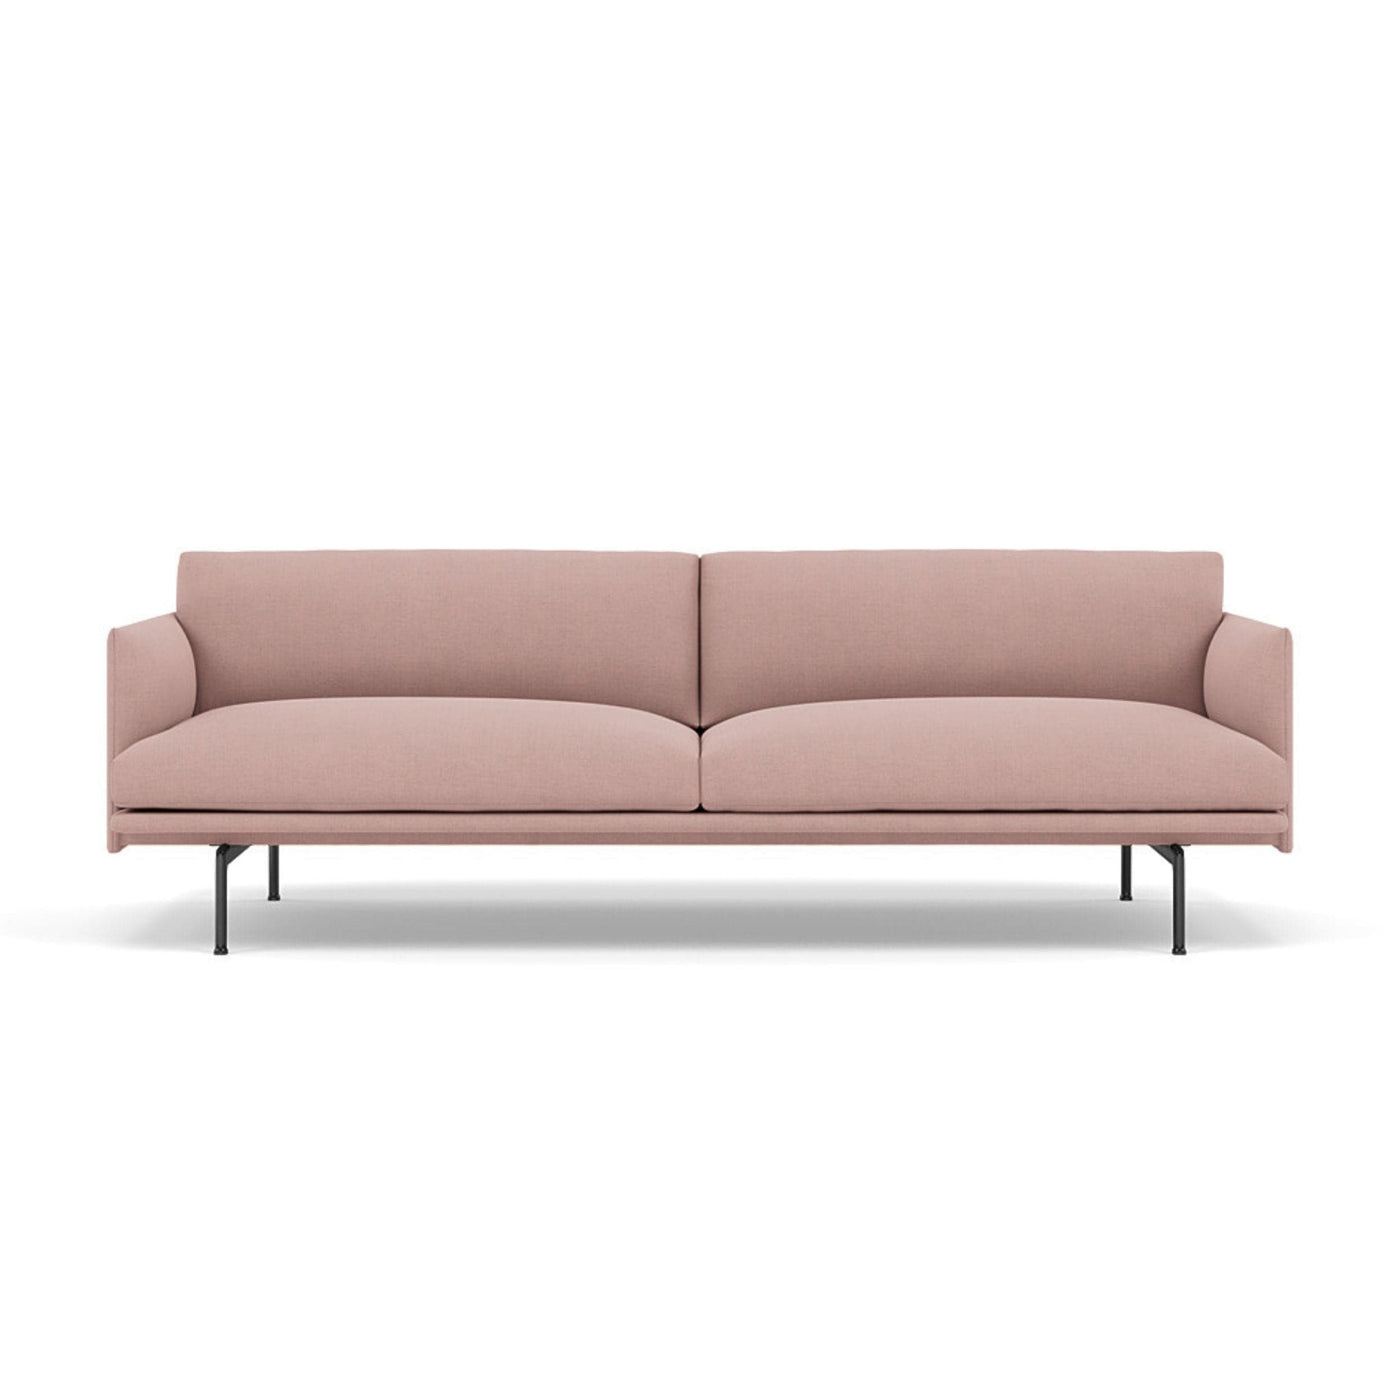 Muuto Outline 3 seater sofa with black legs. Available from someday designs. #colour_fiord-551